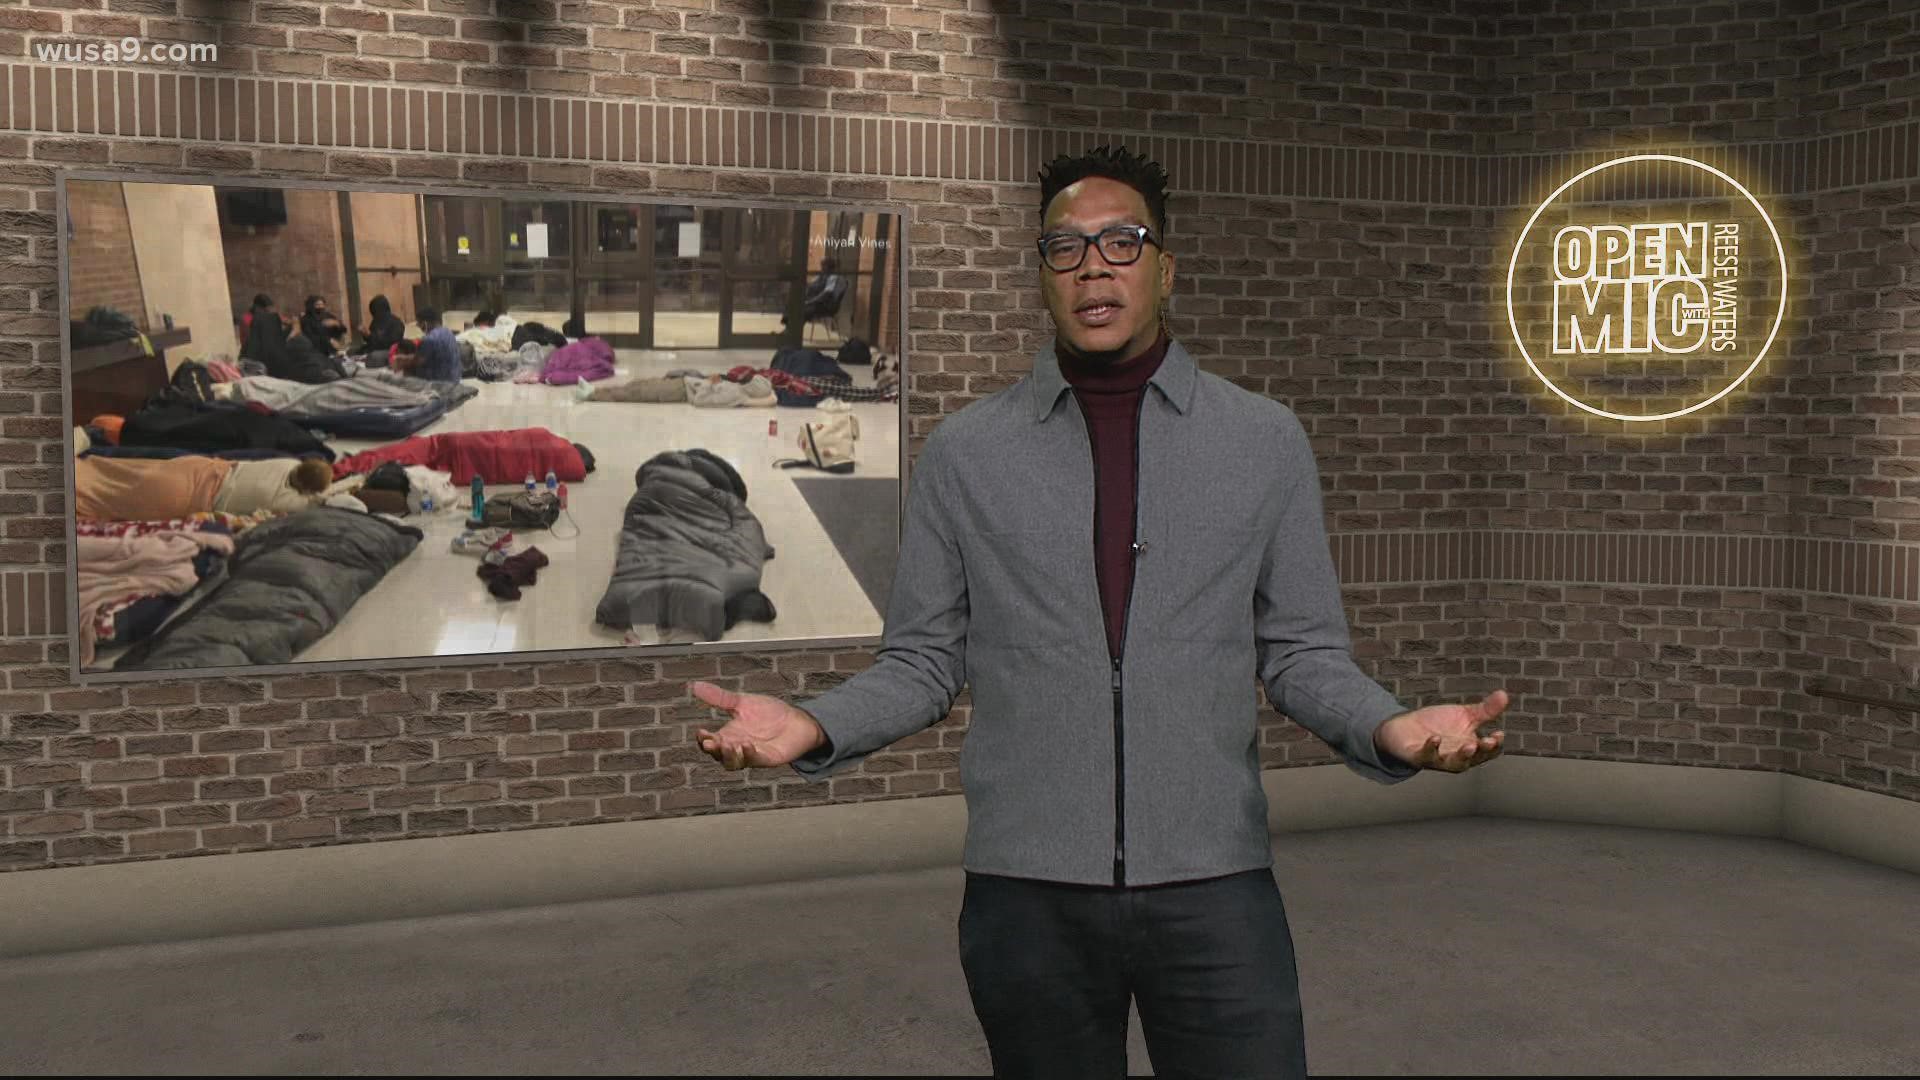 Howard students were armed with a list of grievances, sleeping bags and blankets as they took over the campus community center. WUSA9's Reese Waters gives his take.